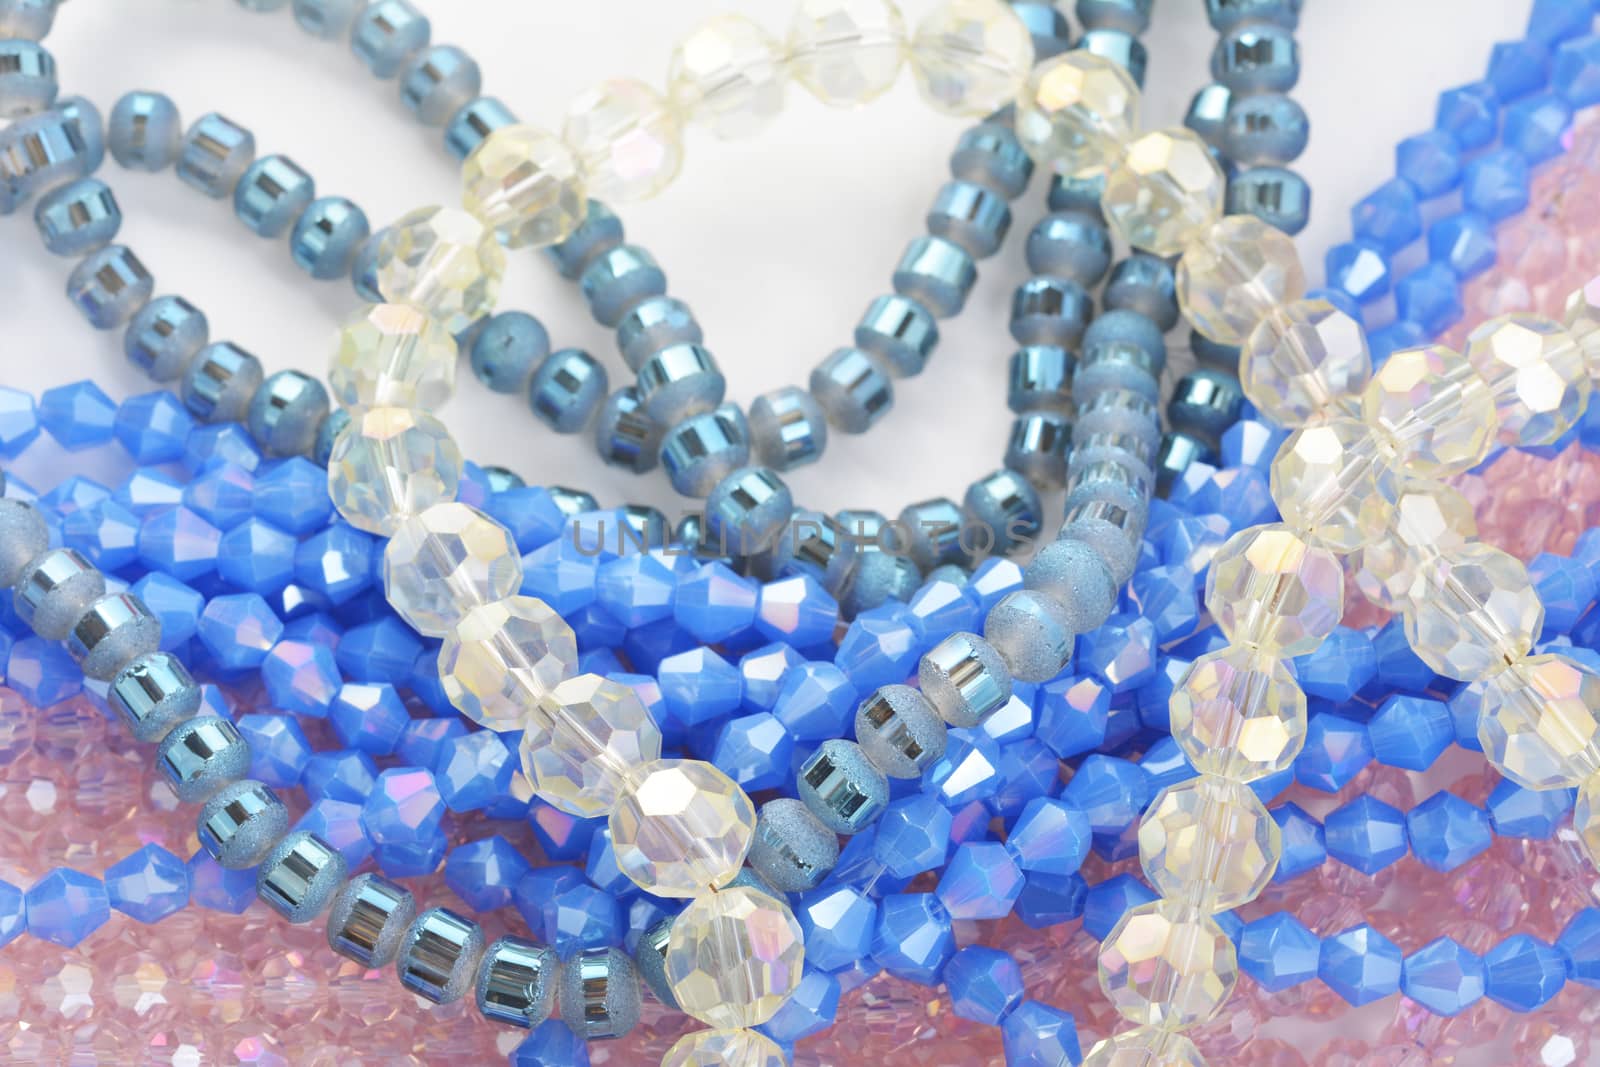 Color faceted glass sparkle beads. Materials for creative work on white background. by polyats